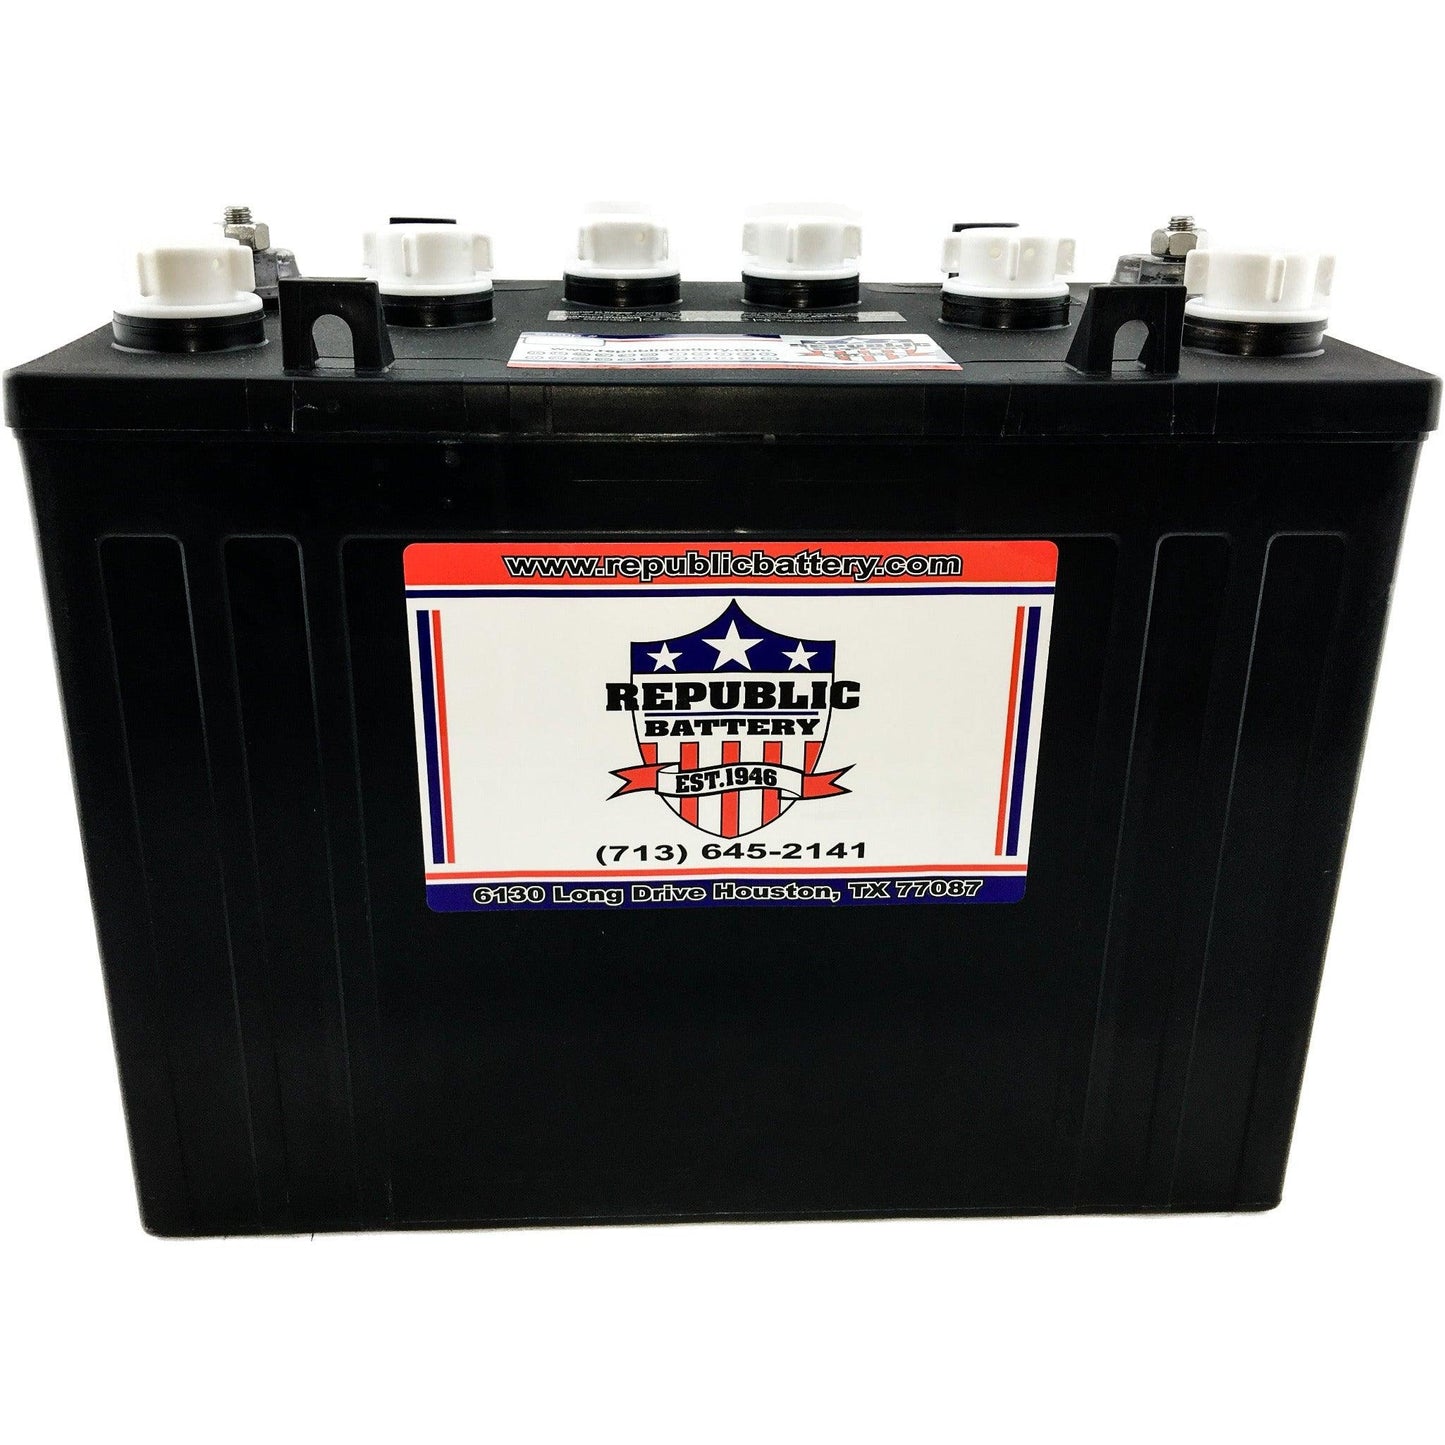 COMING AUG 2023 | RGC-1275 (T1275 Replacement) 12V 170AH Flooded Deep Cycle Battery - Republic Battery Online